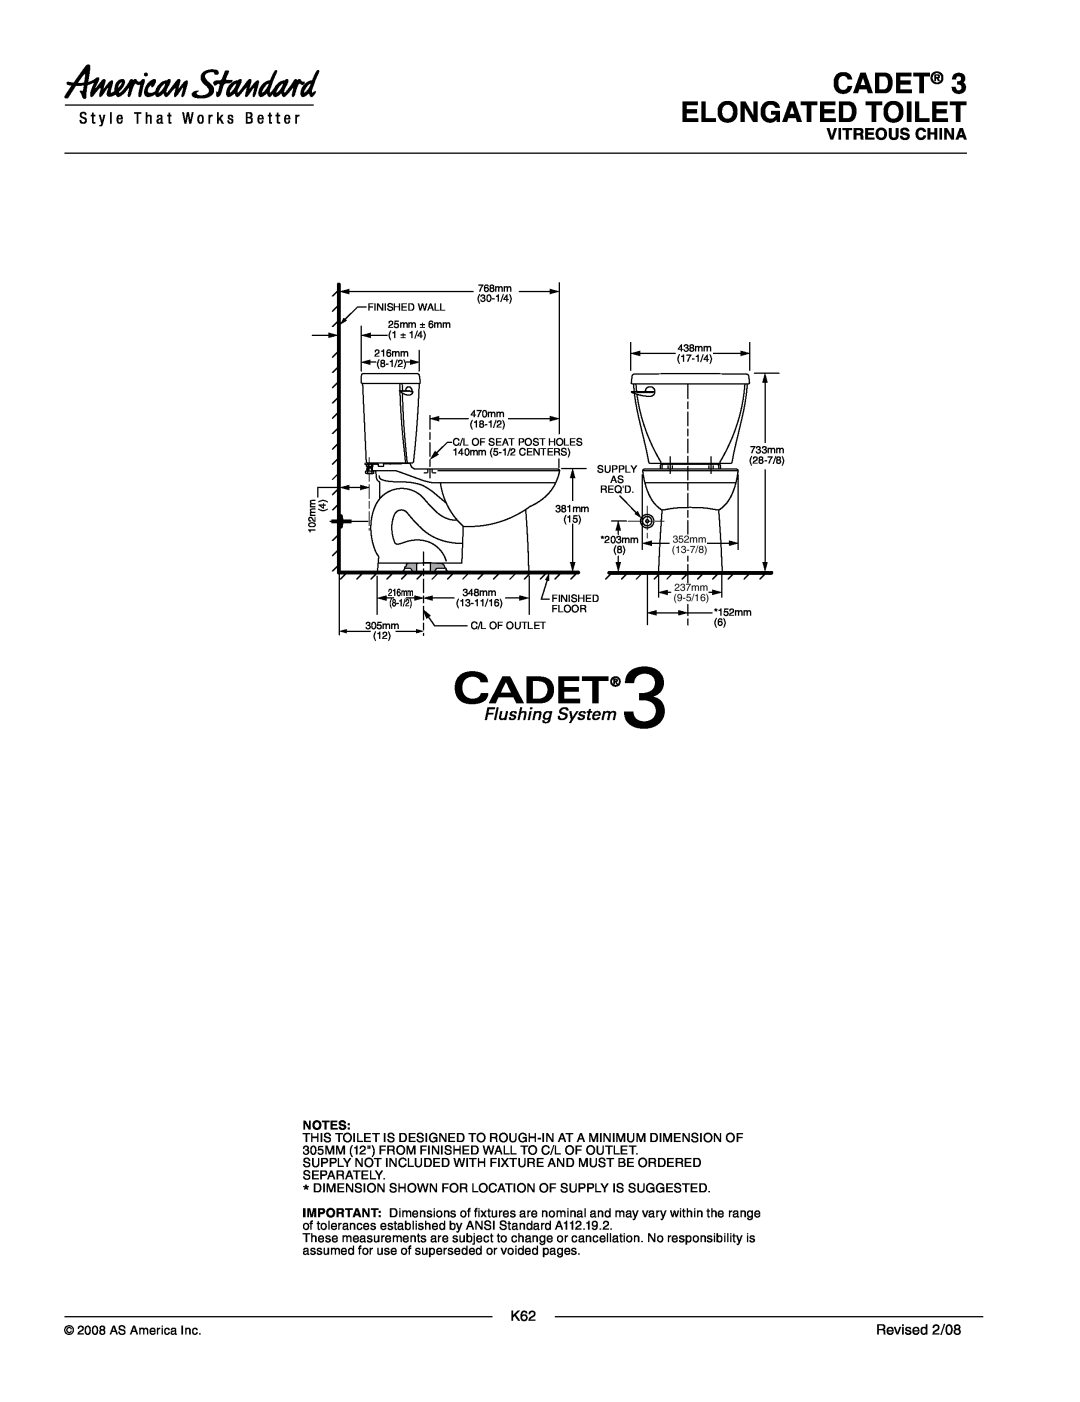 American Standard 4021.016, 2383.012 dimensions Cadet Elongated Toilet, Vitreous China, Revised 2/08 